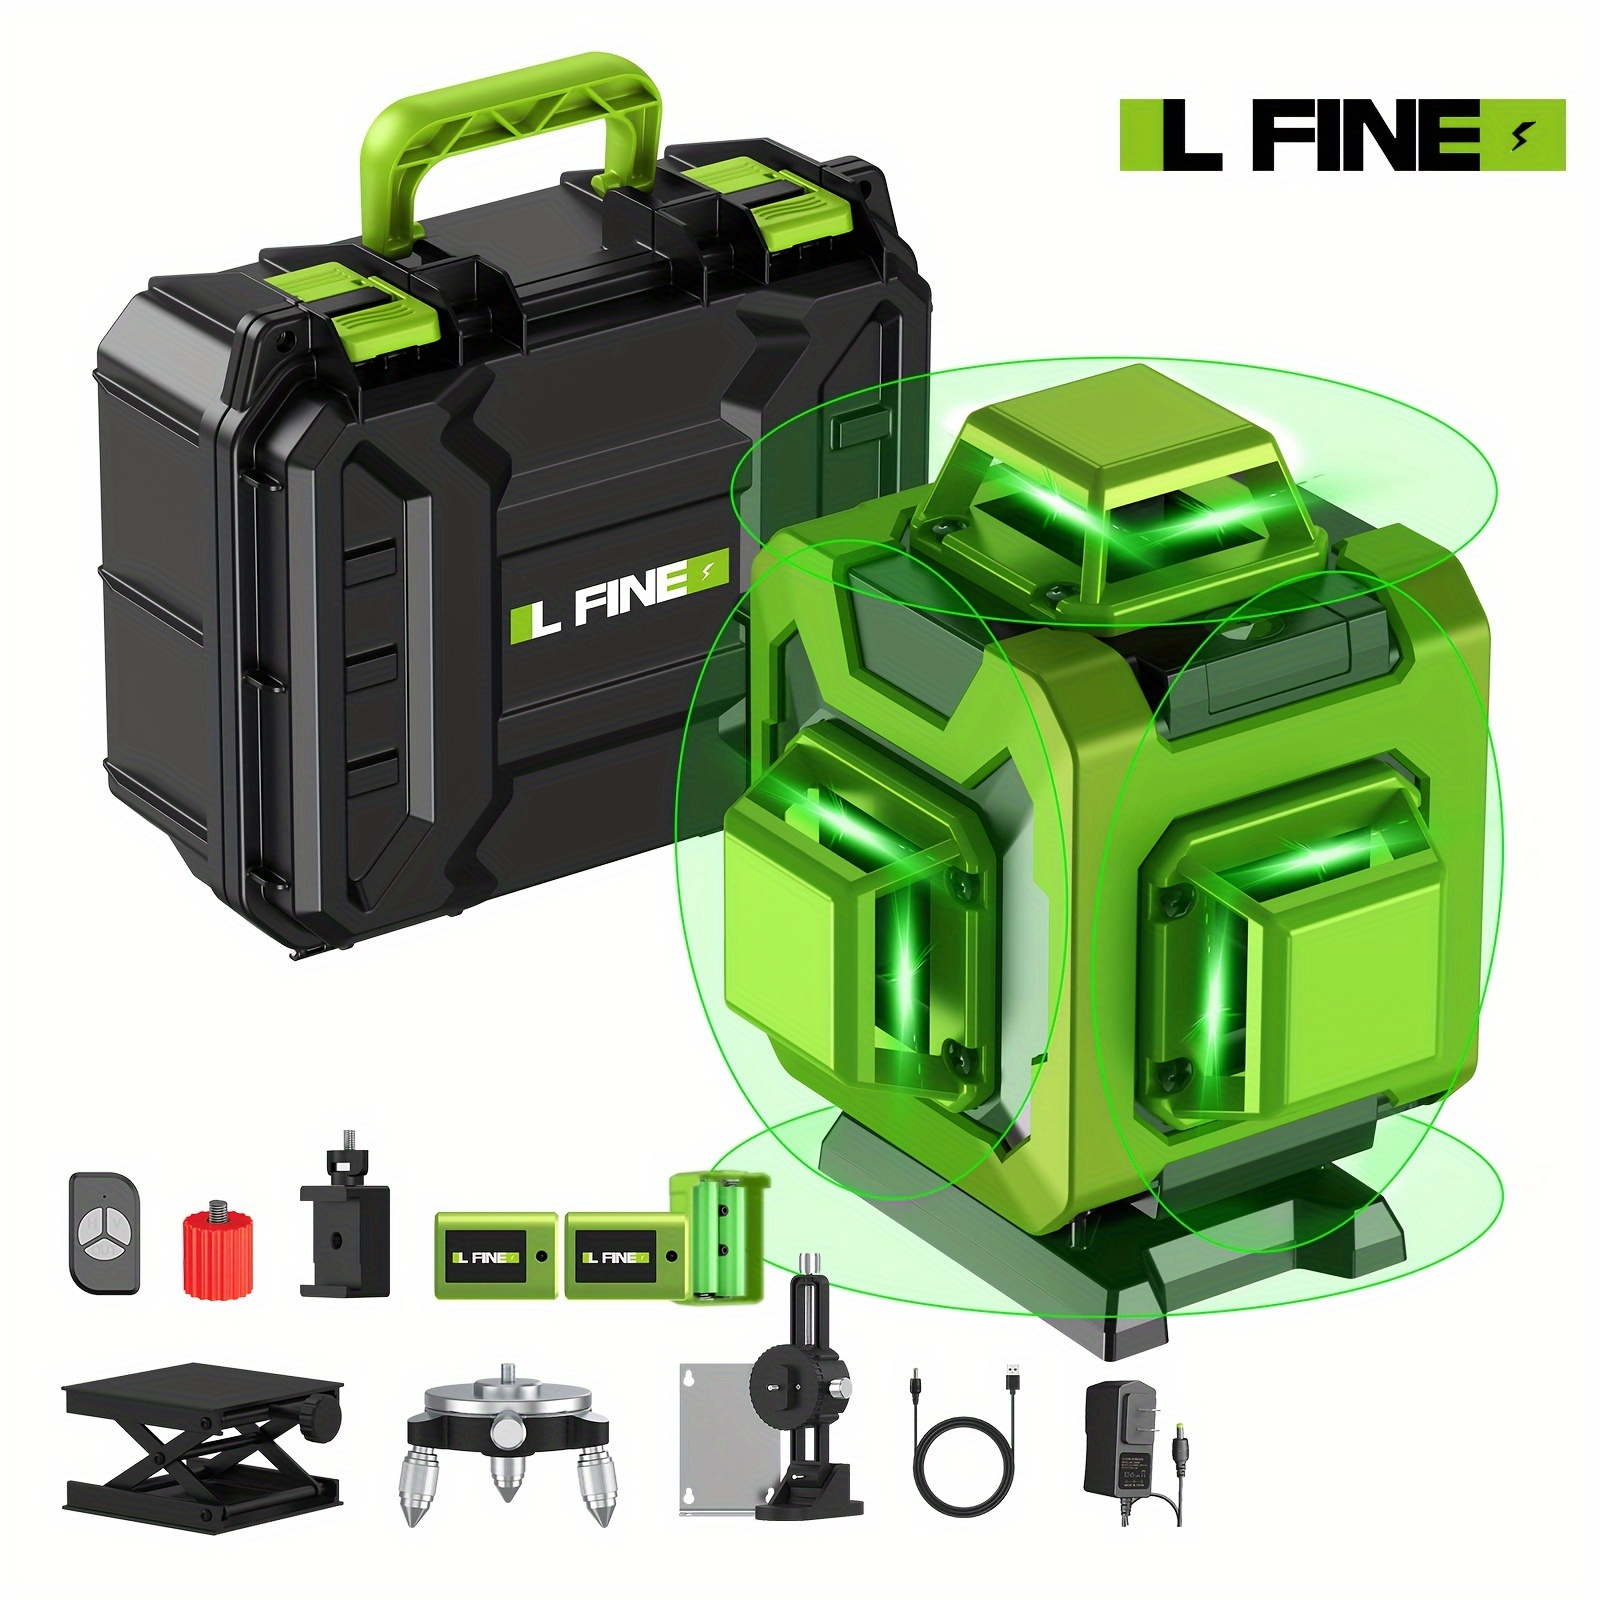 

16 Line Green Laser Level, High-precision, Multifunctional For Use In Various Scenarios, Luxurious Plastic Box, Convenient And Portable